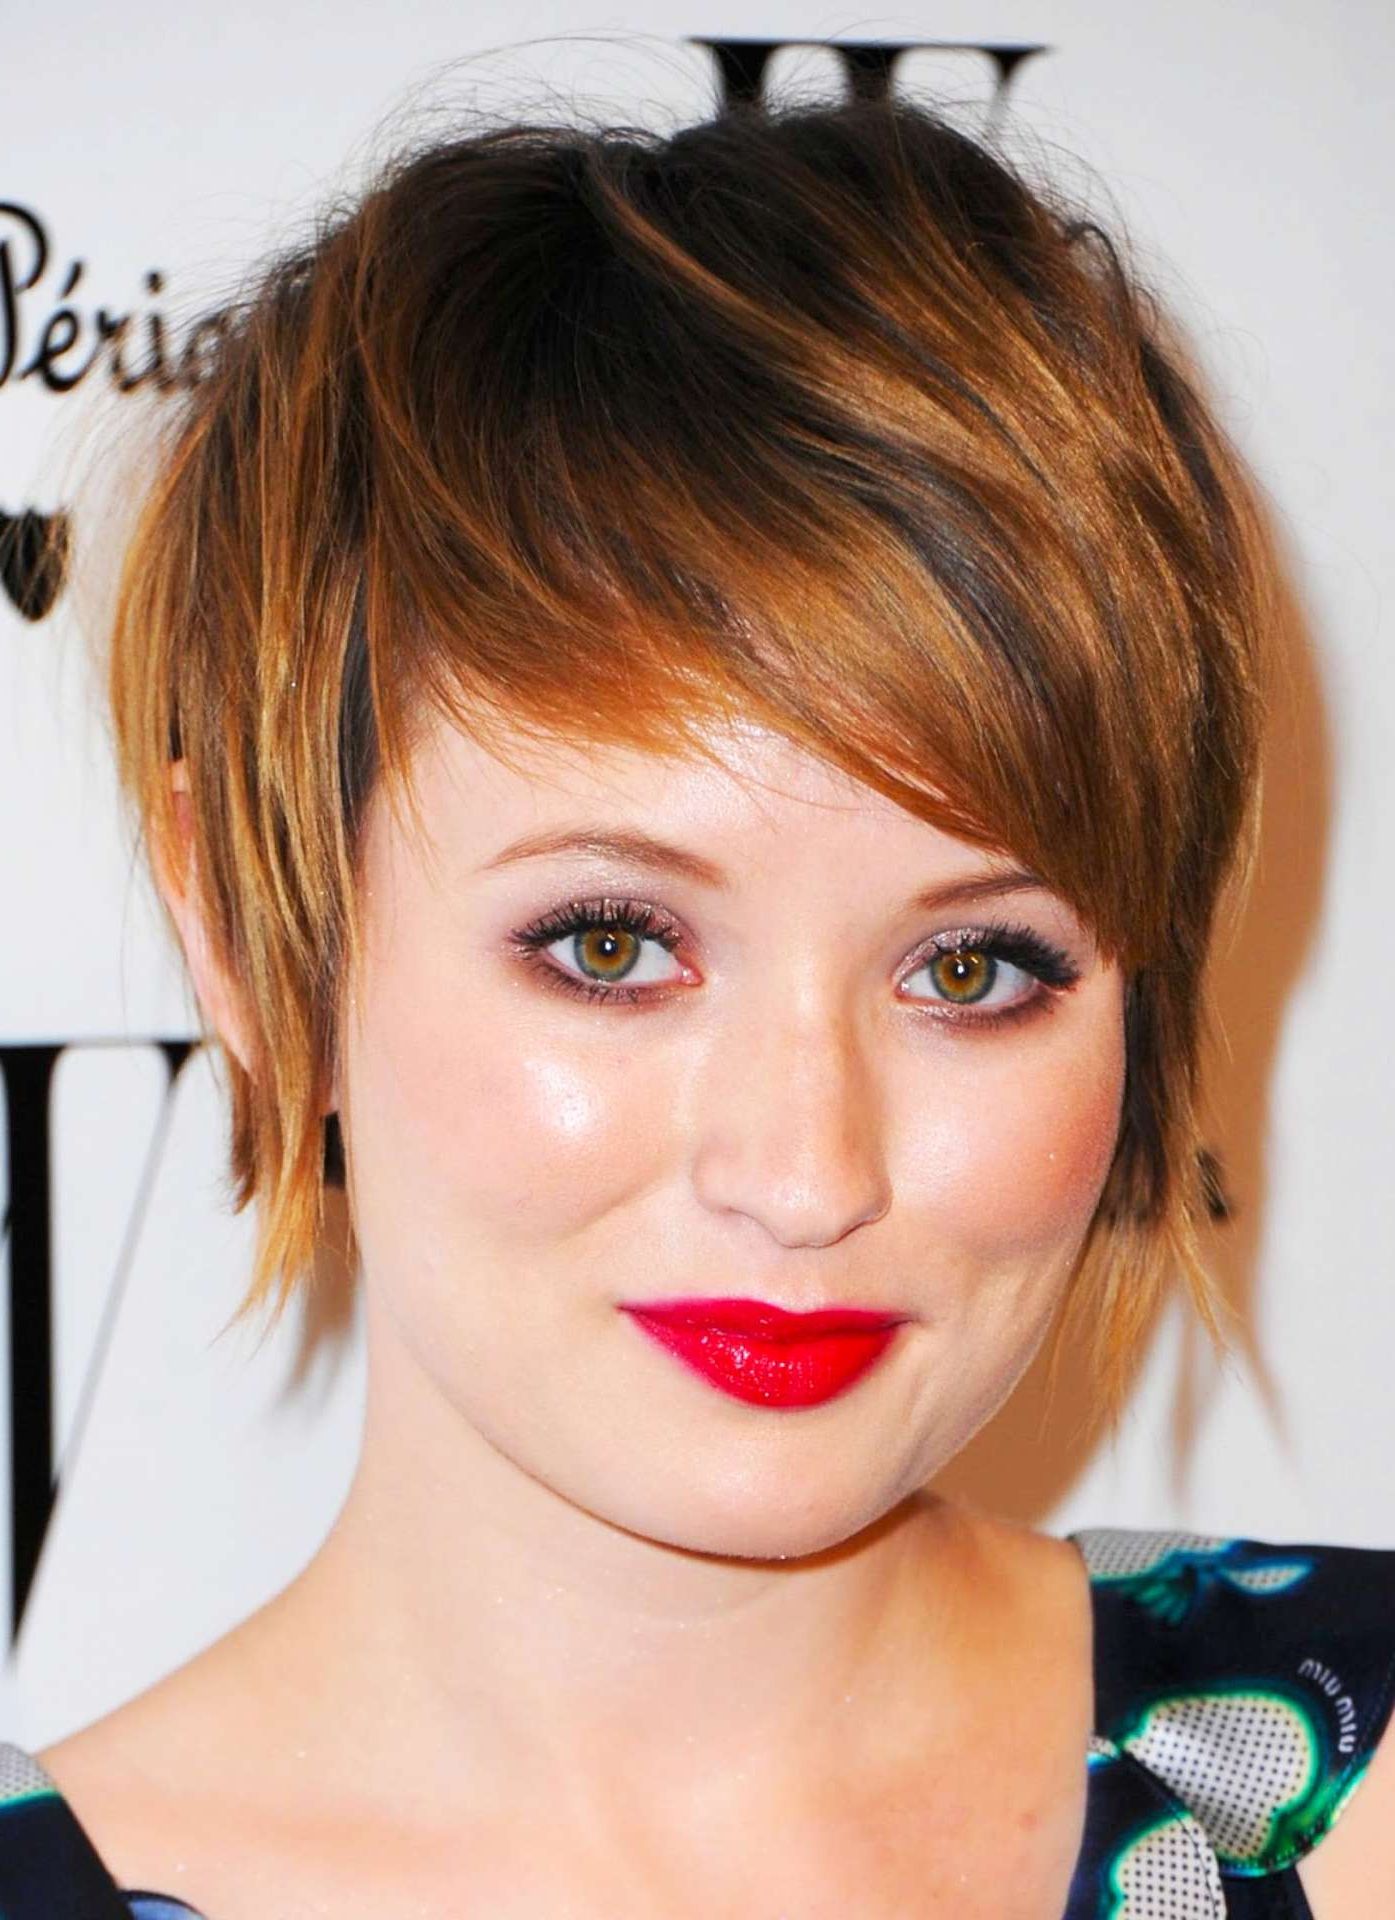 14 Best Short Haircuts For Women With Round Faces With Short Hairstyles For Women With A Round Face (View 10 of 25)